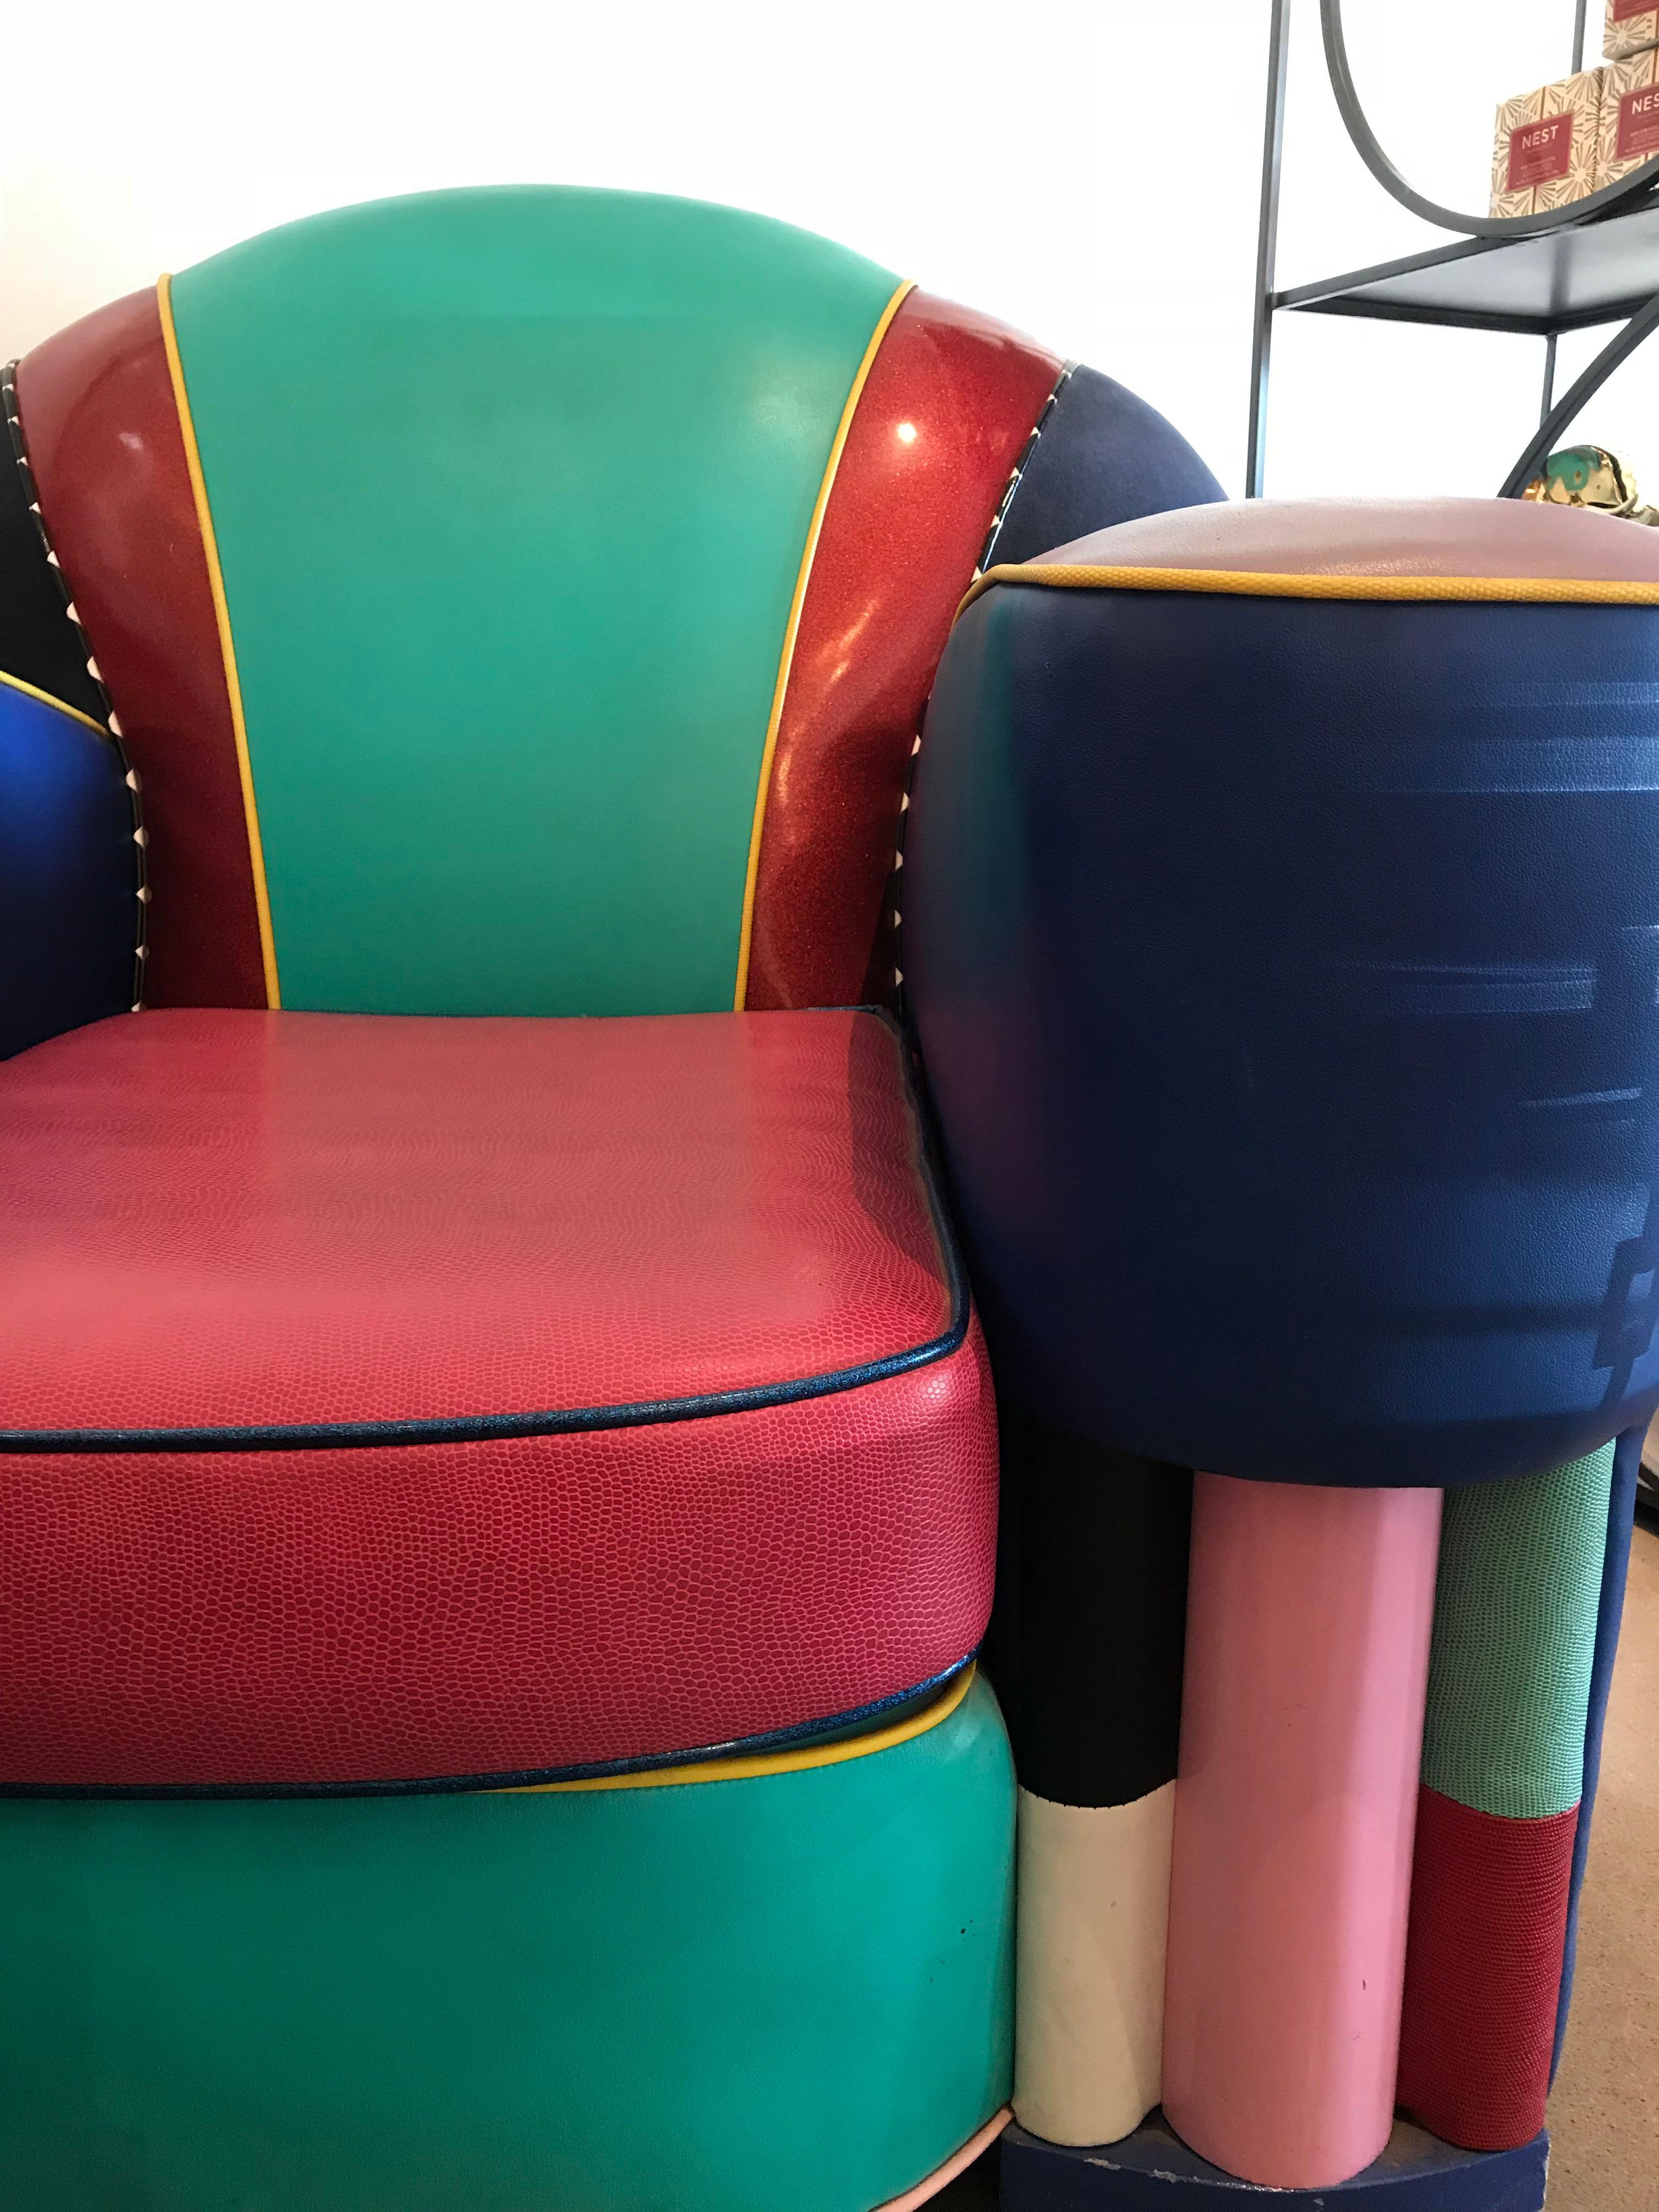 This stunning piece inspired club chair by 1980s designer, Harry Siegel is finished in primary and secondary colored vinyl. It is extremely comfortable and quick a fashion piece!